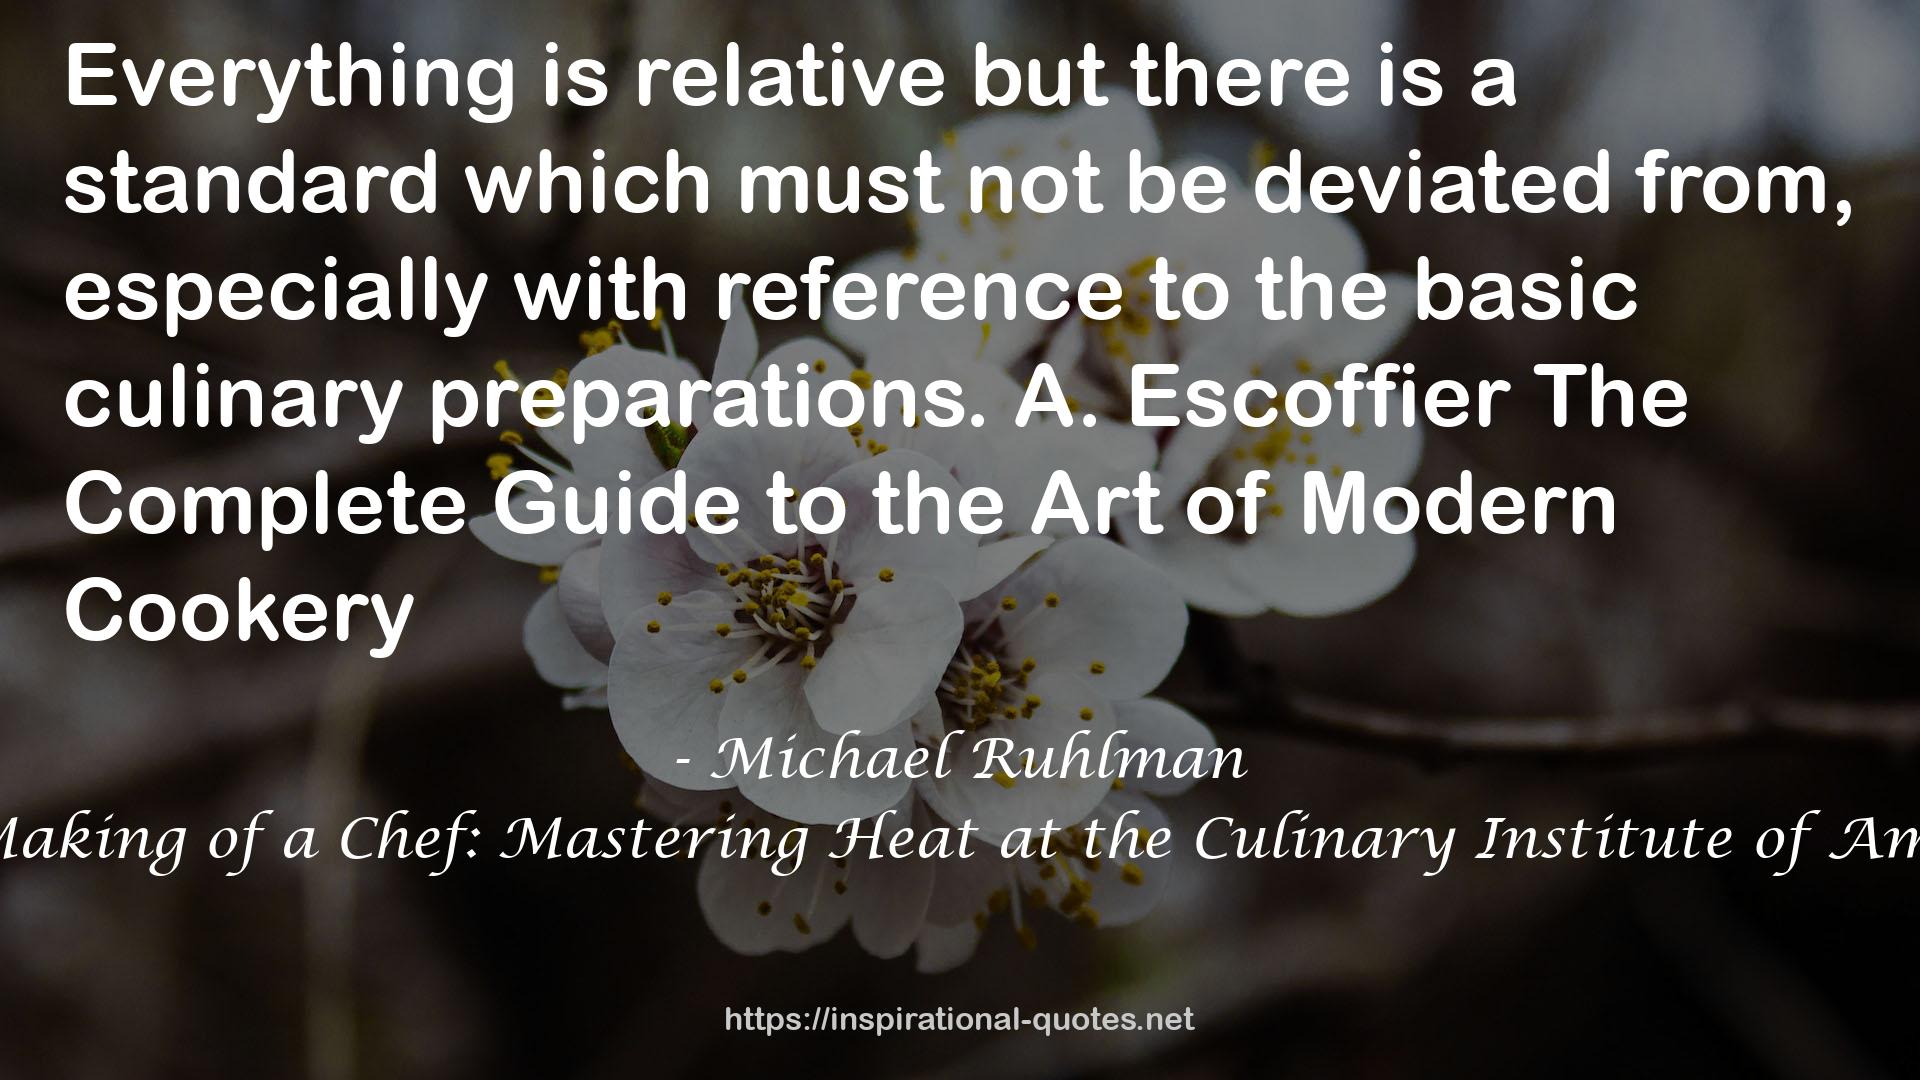 The Making of a Chef: Mastering Heat at the Culinary Institute of America QUOTES